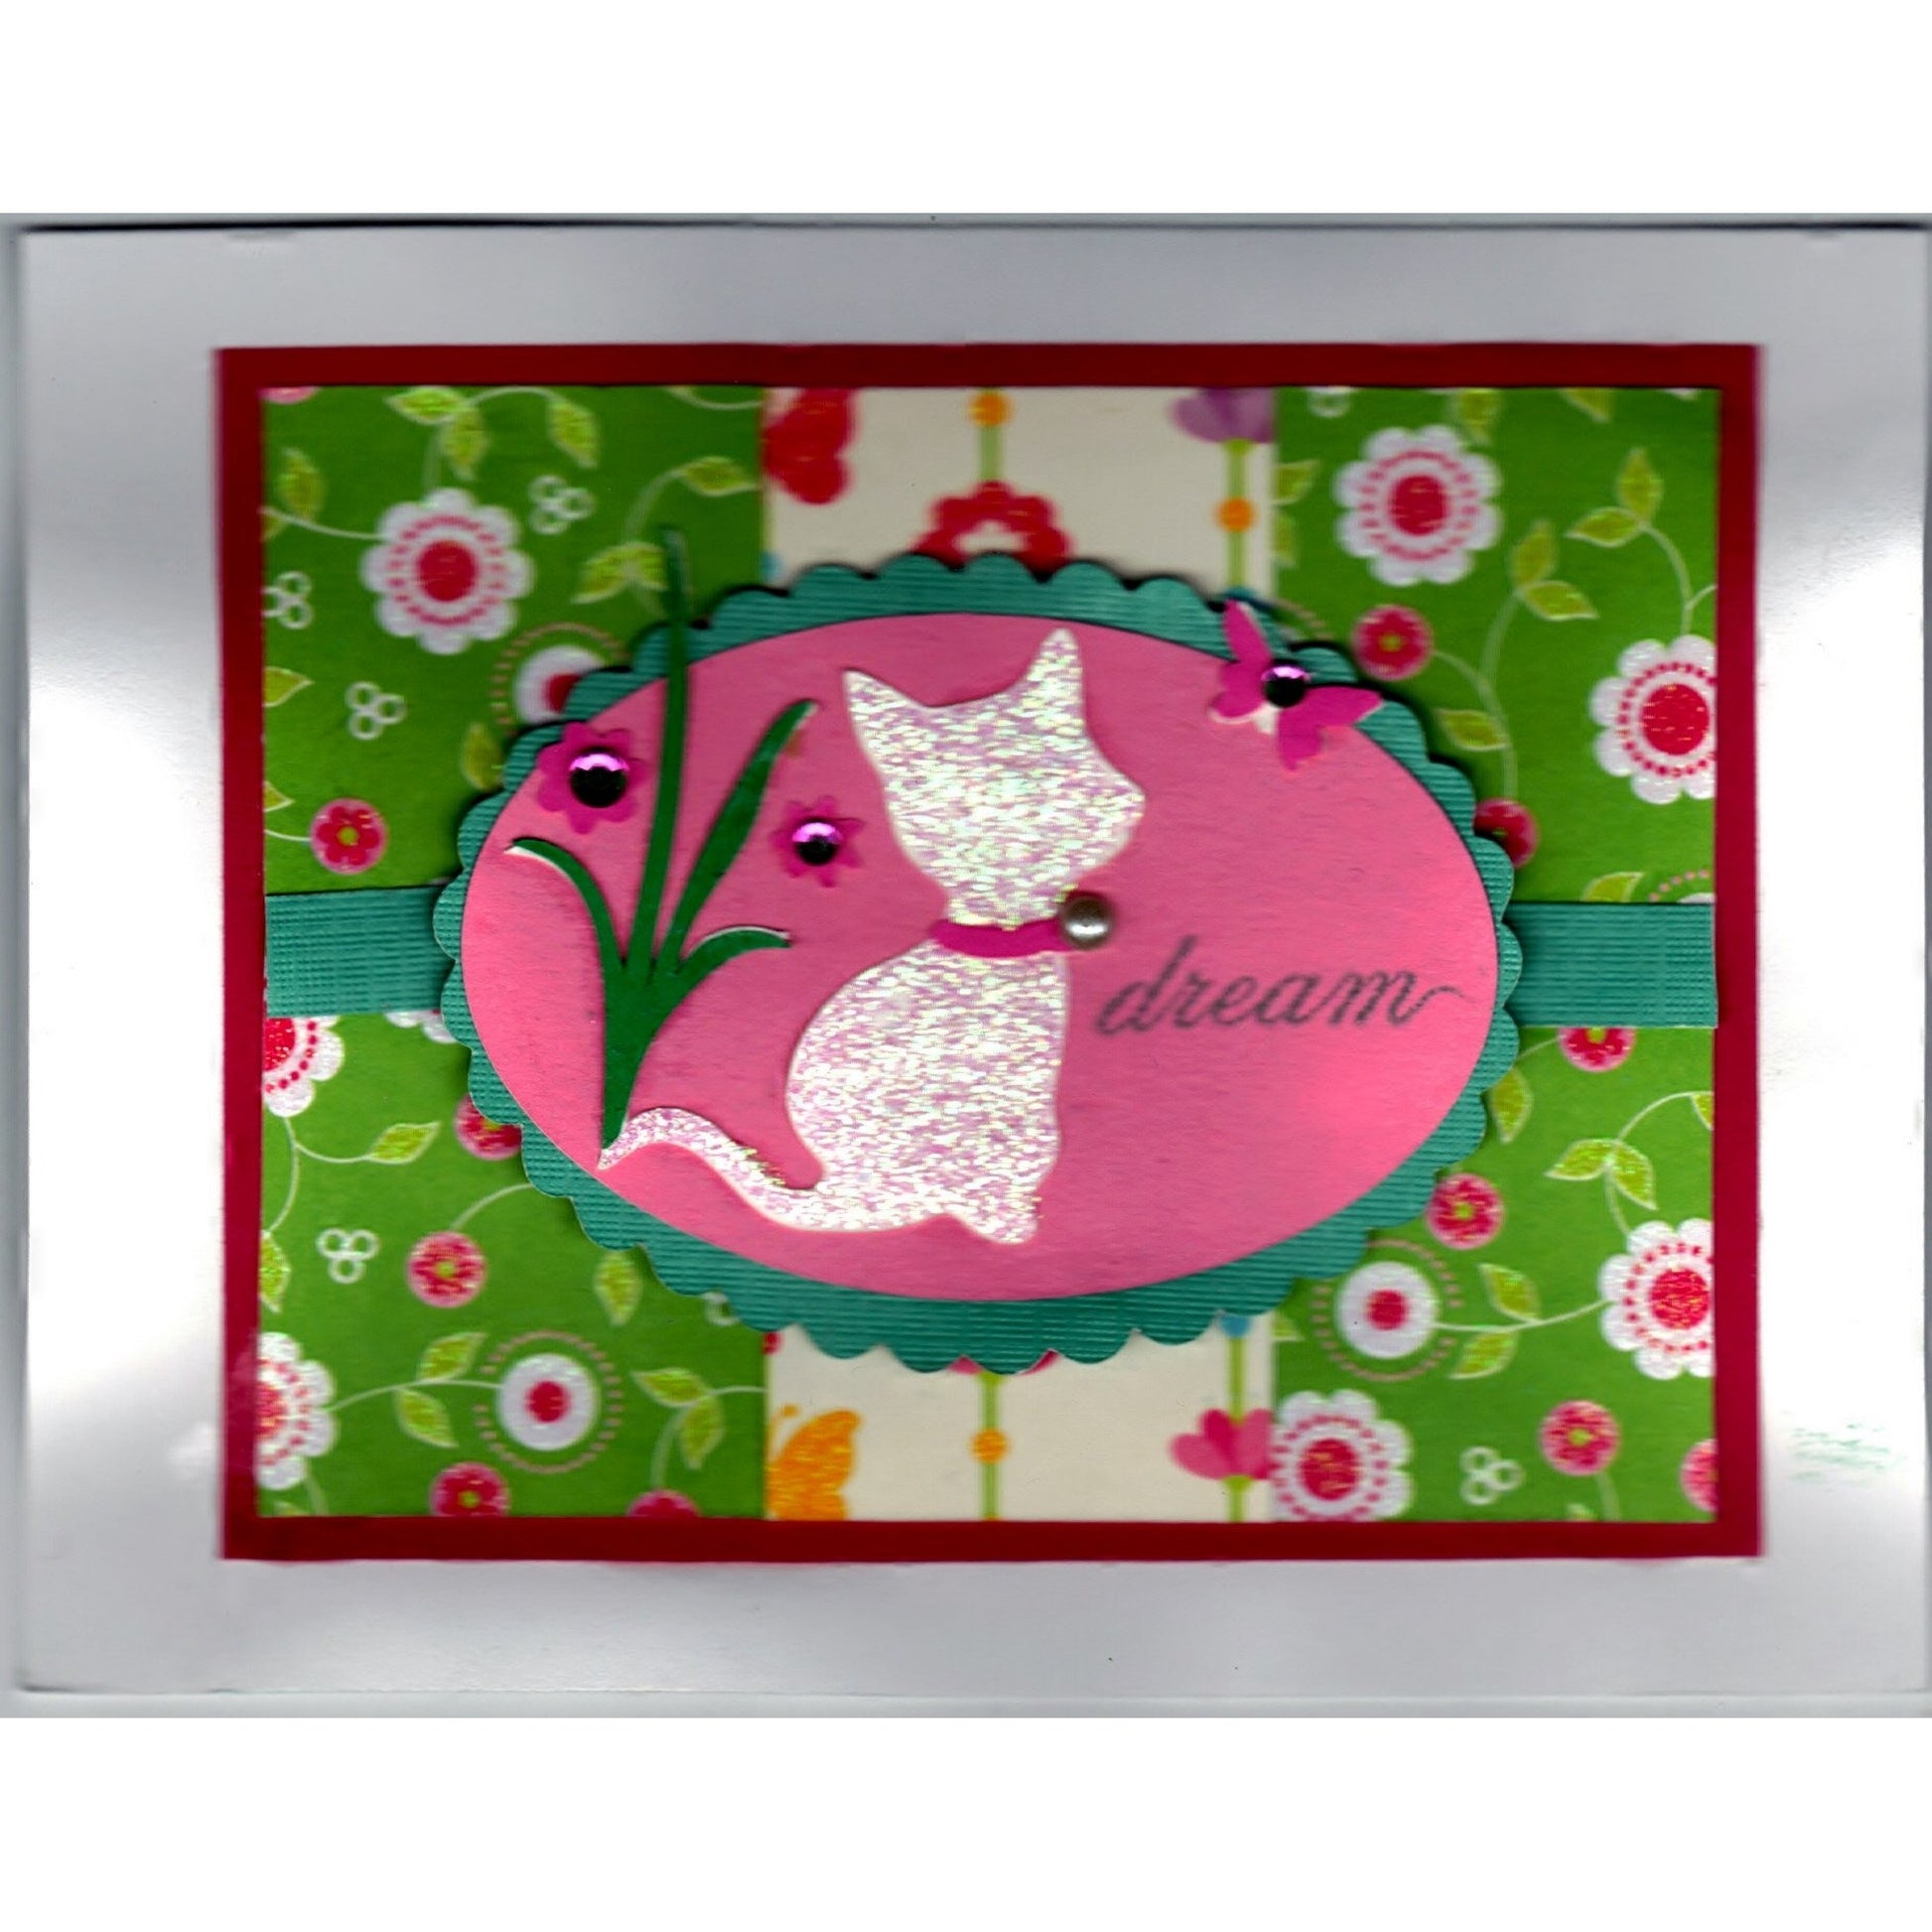 You Dream Cat Handmade Good Greeting Supply Card - Cards And Other Paper Products - Made In U.S.A. - SharPharMade - 1